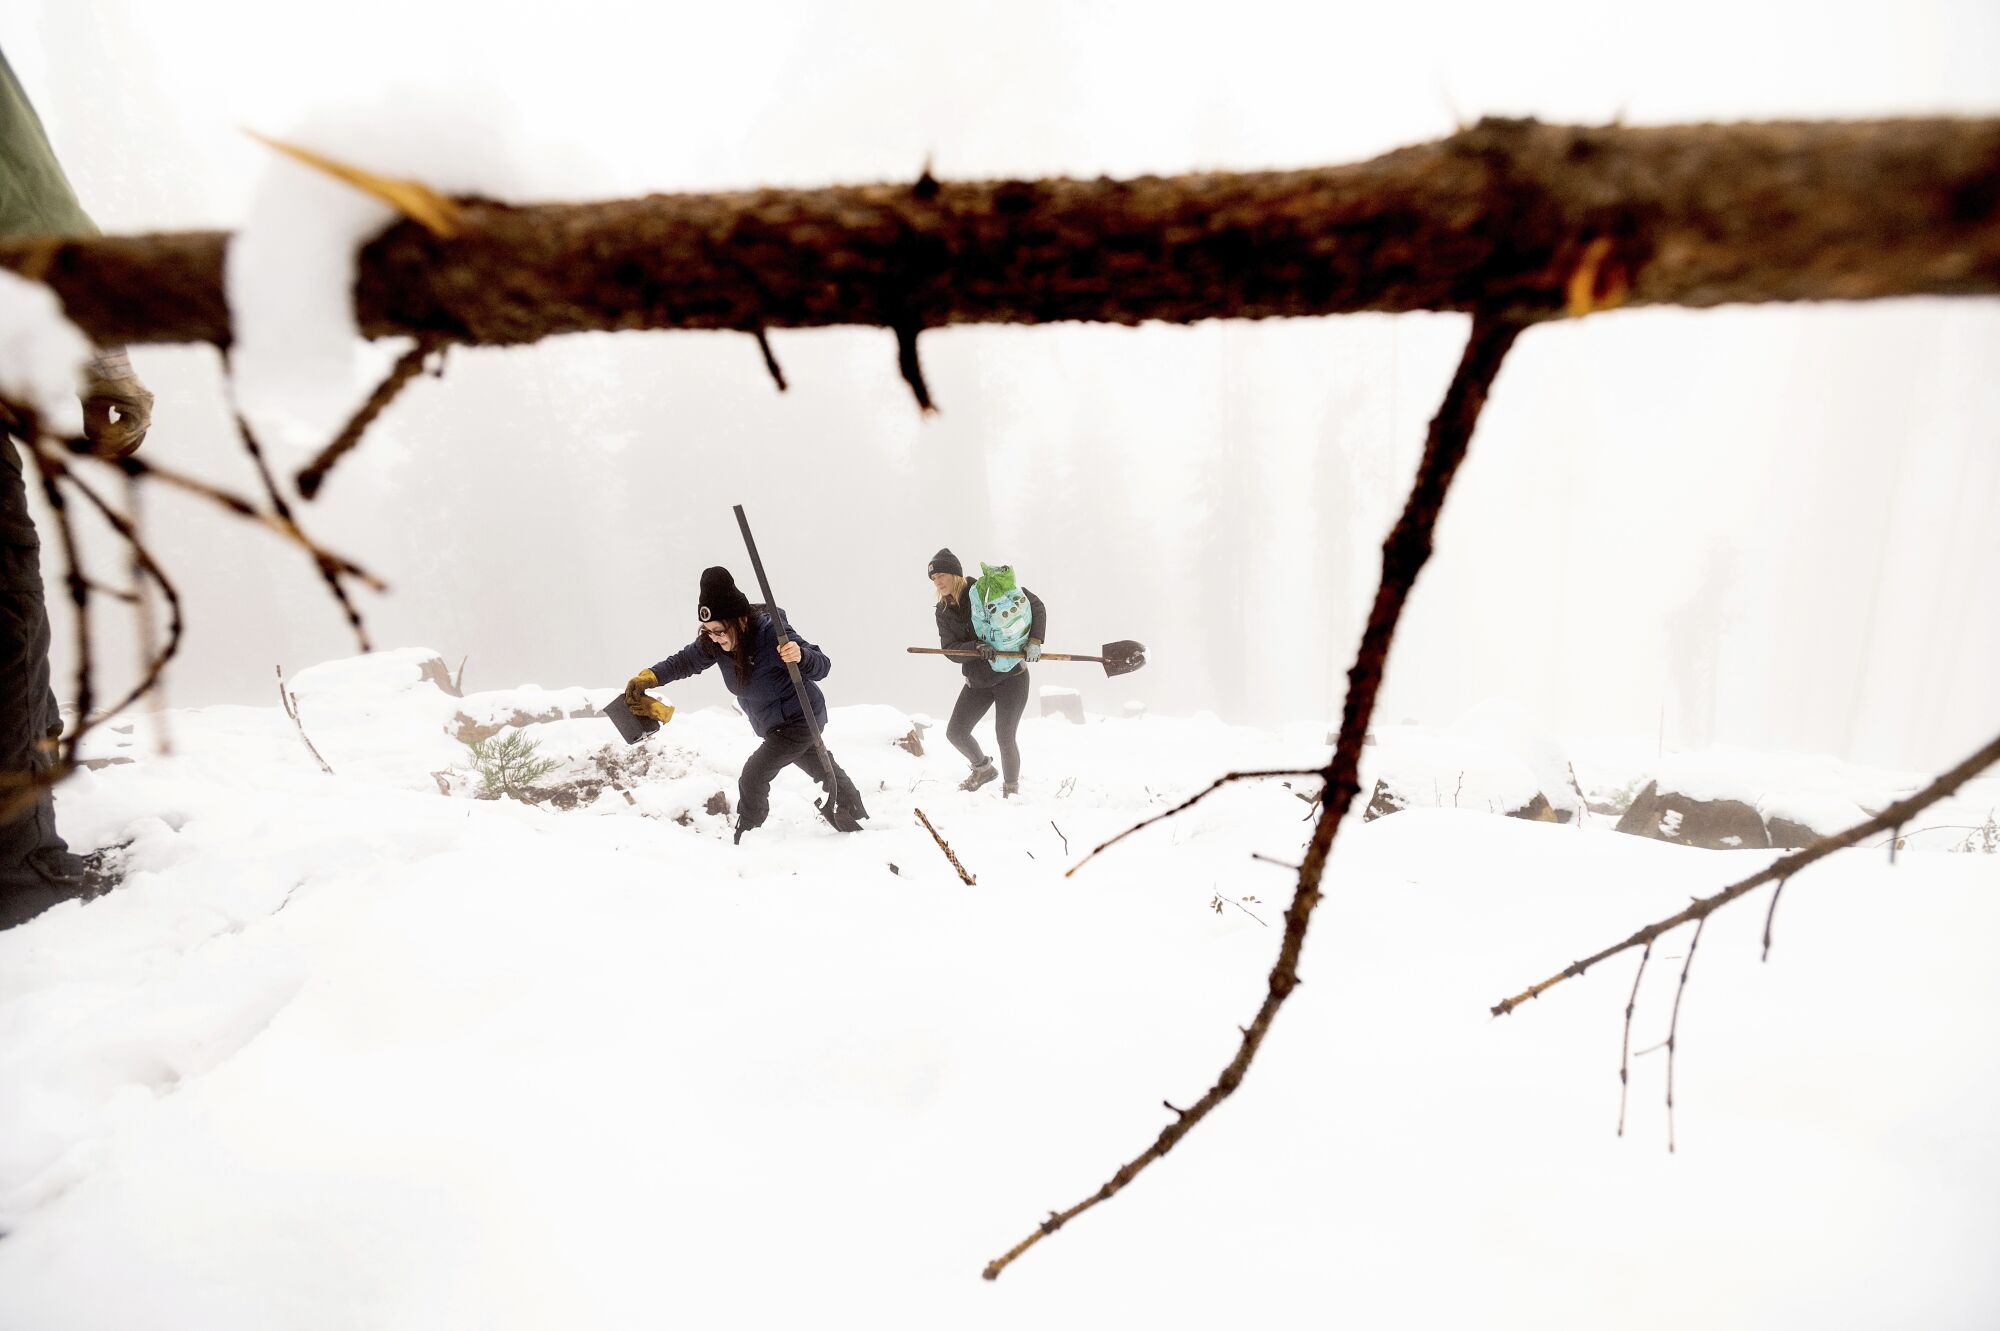 Two people holding shovels are seen in a snow-covered landscape